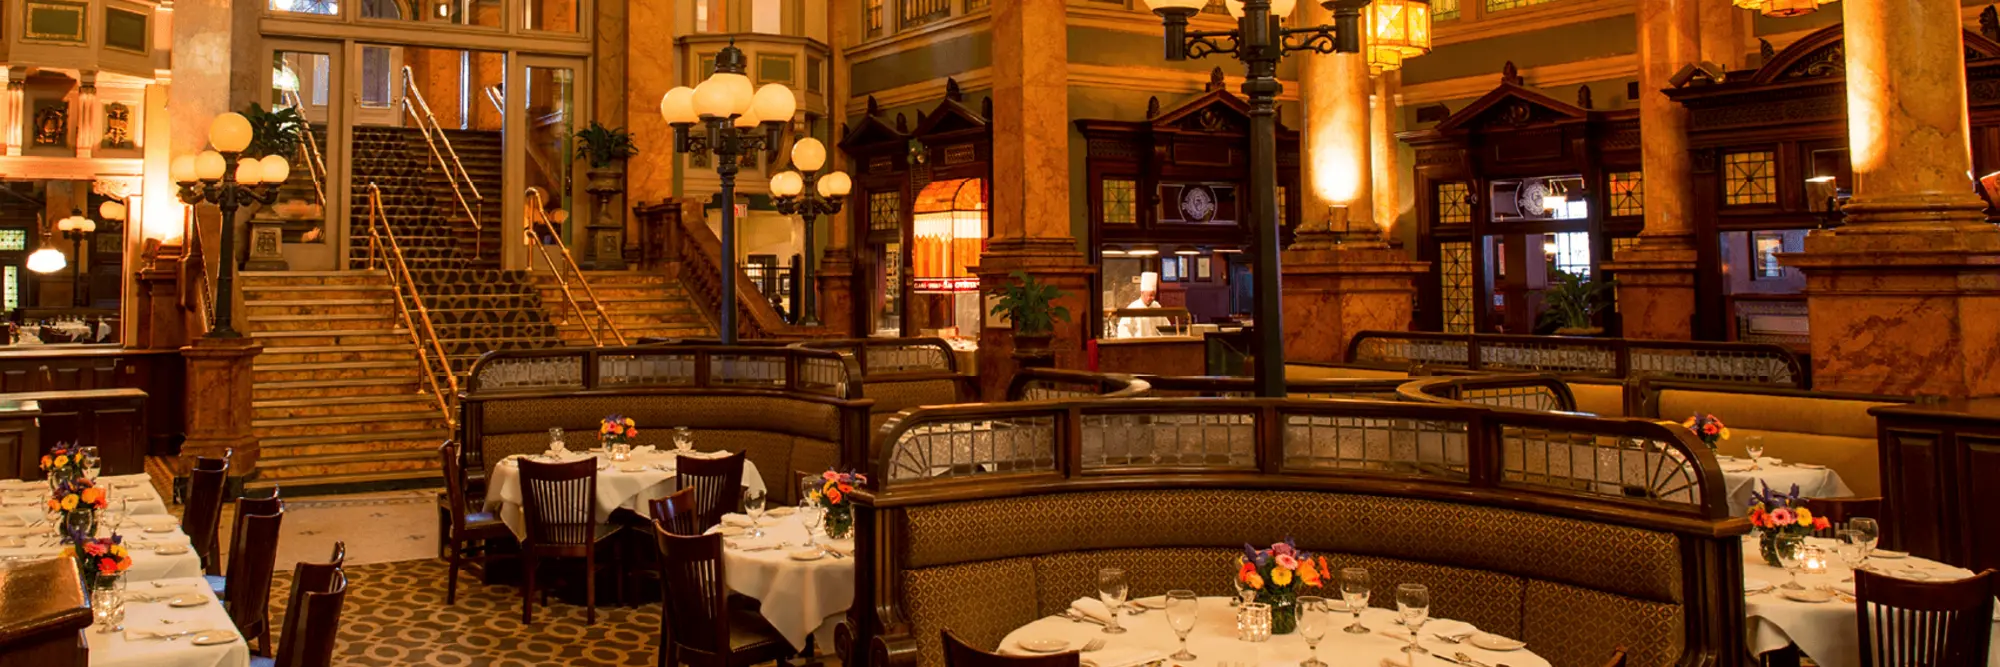 The Grand Concourse Restaurant in Station Square